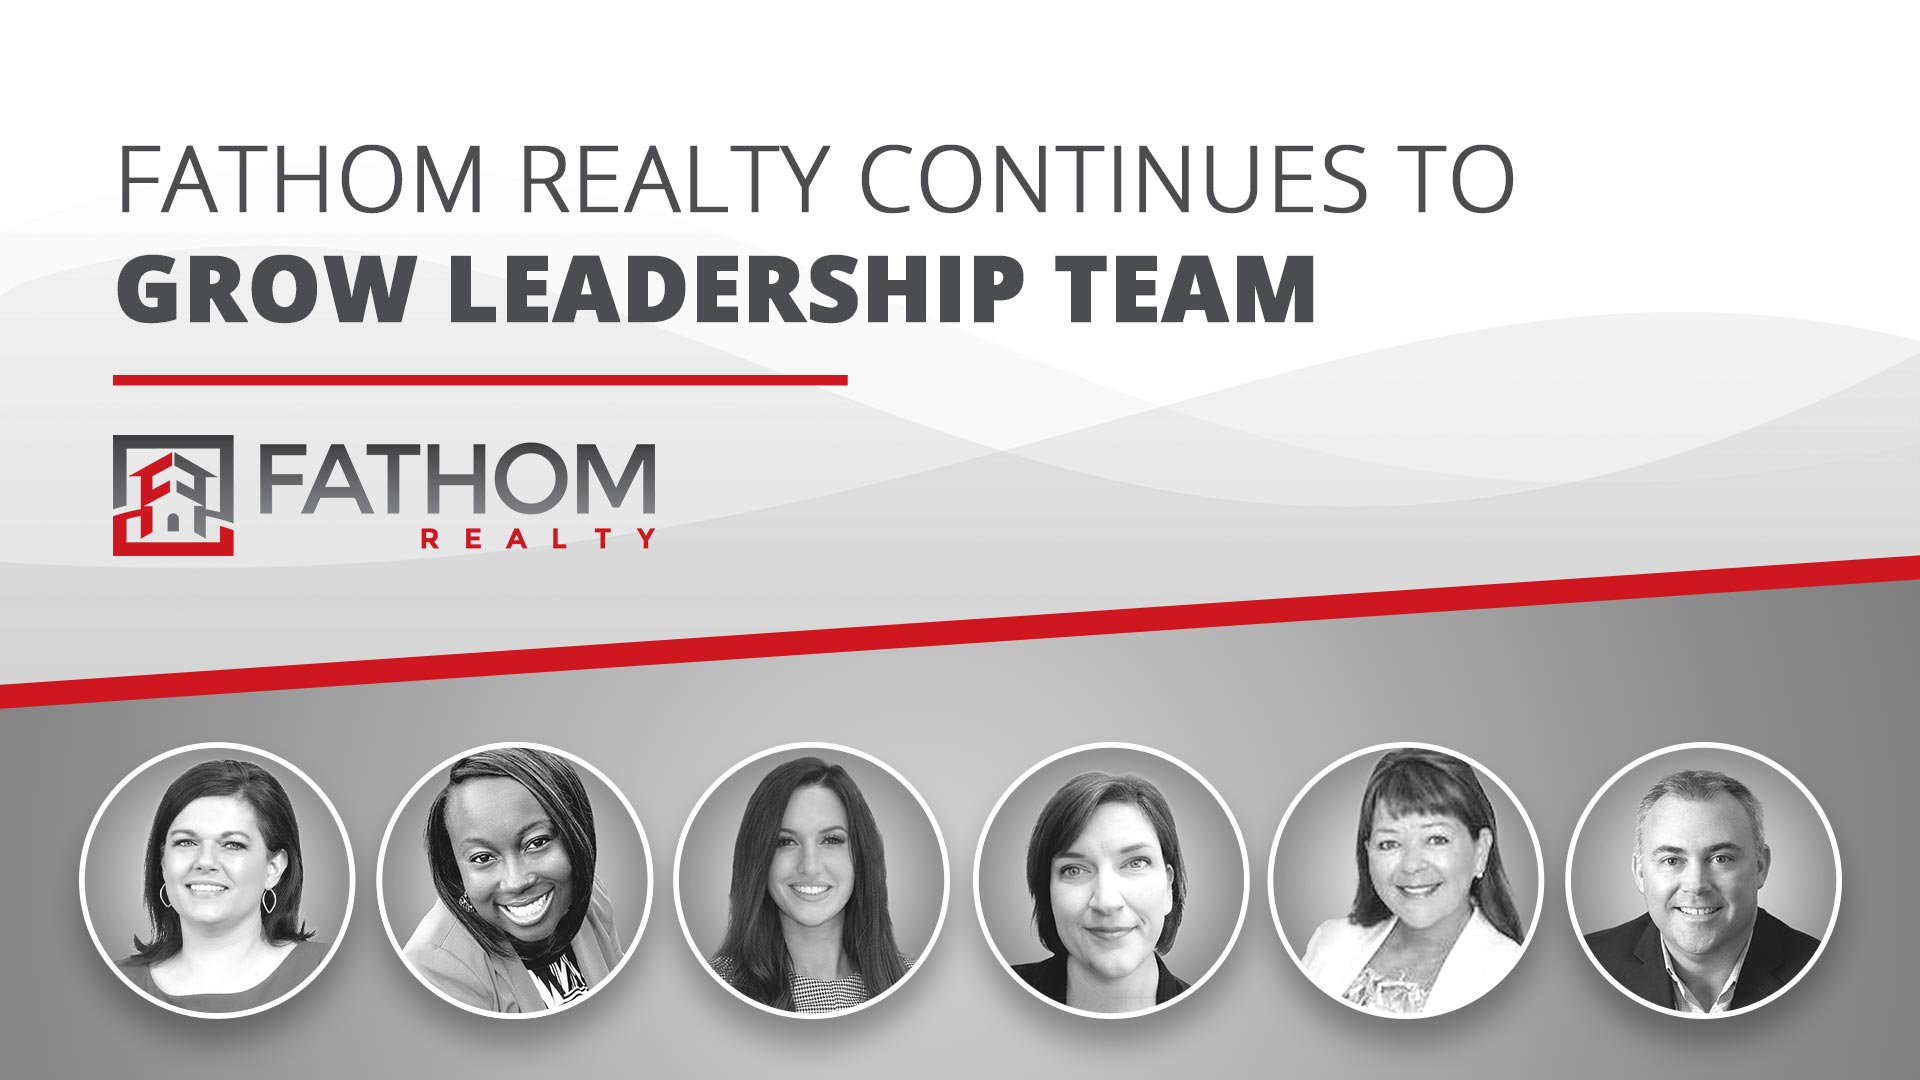 Featured image for “Fathom Realty Continues to Grow Leadership Team”